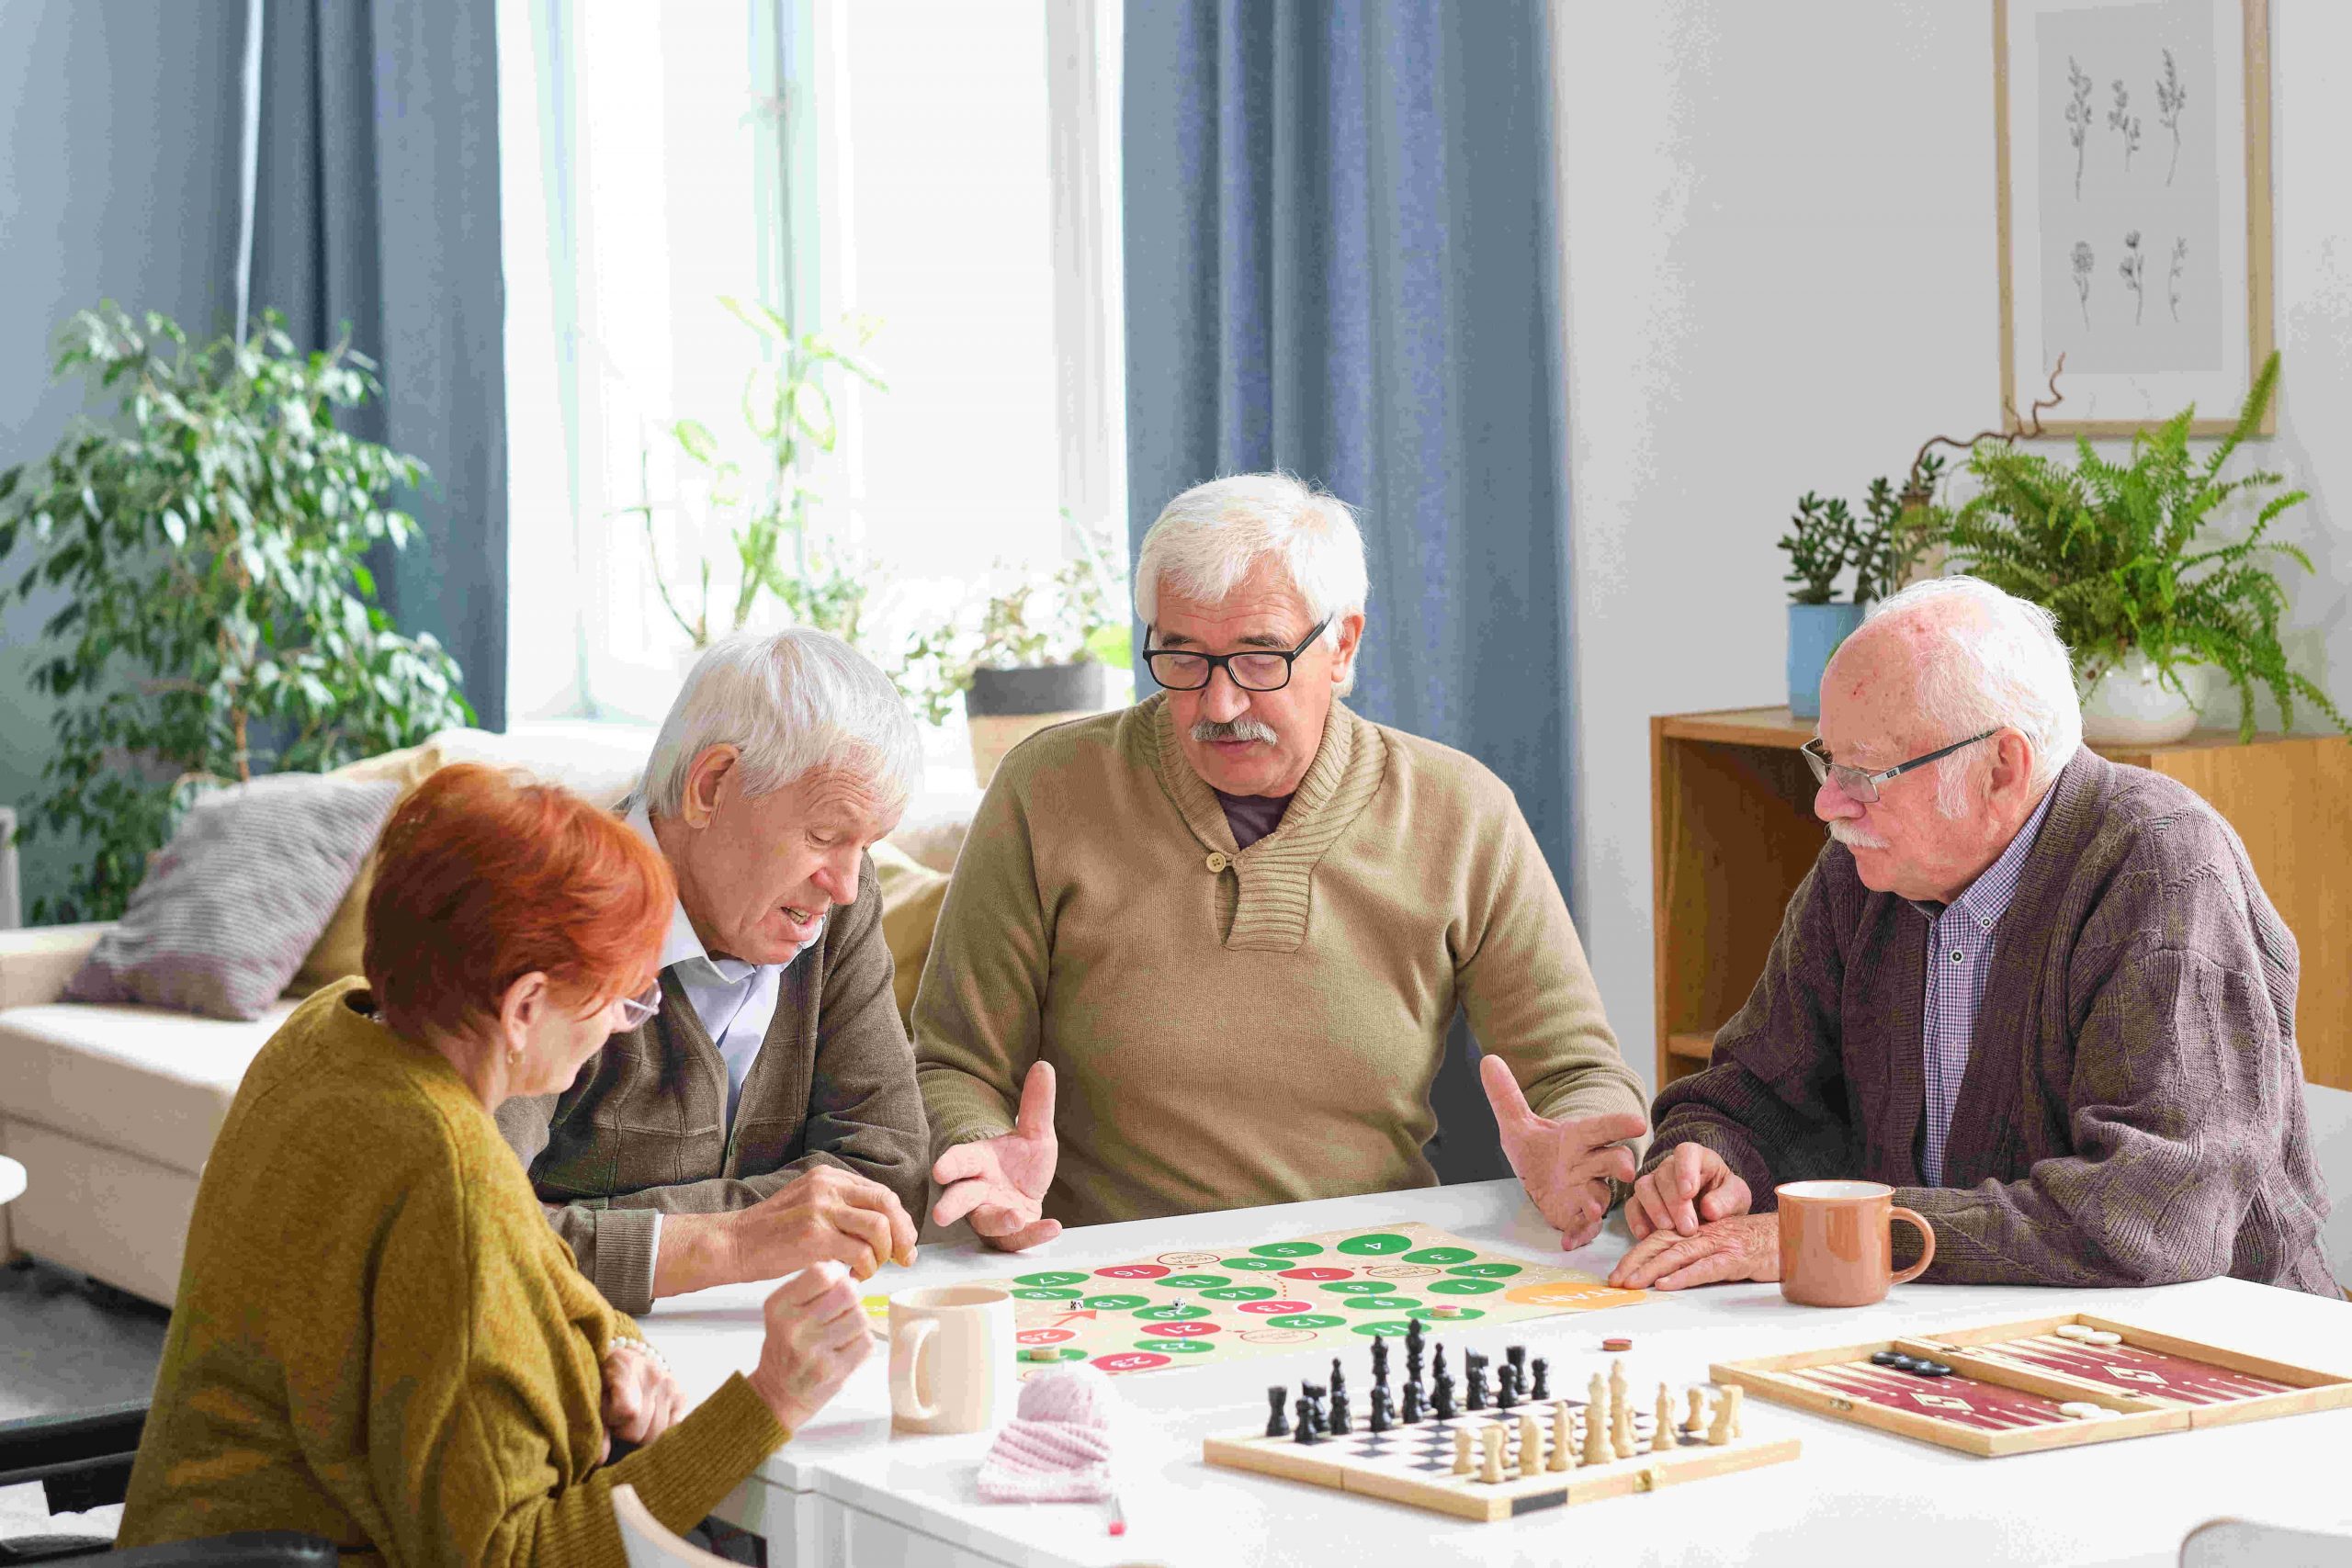 Group of elderly people sitting at the table and playing board game in the room